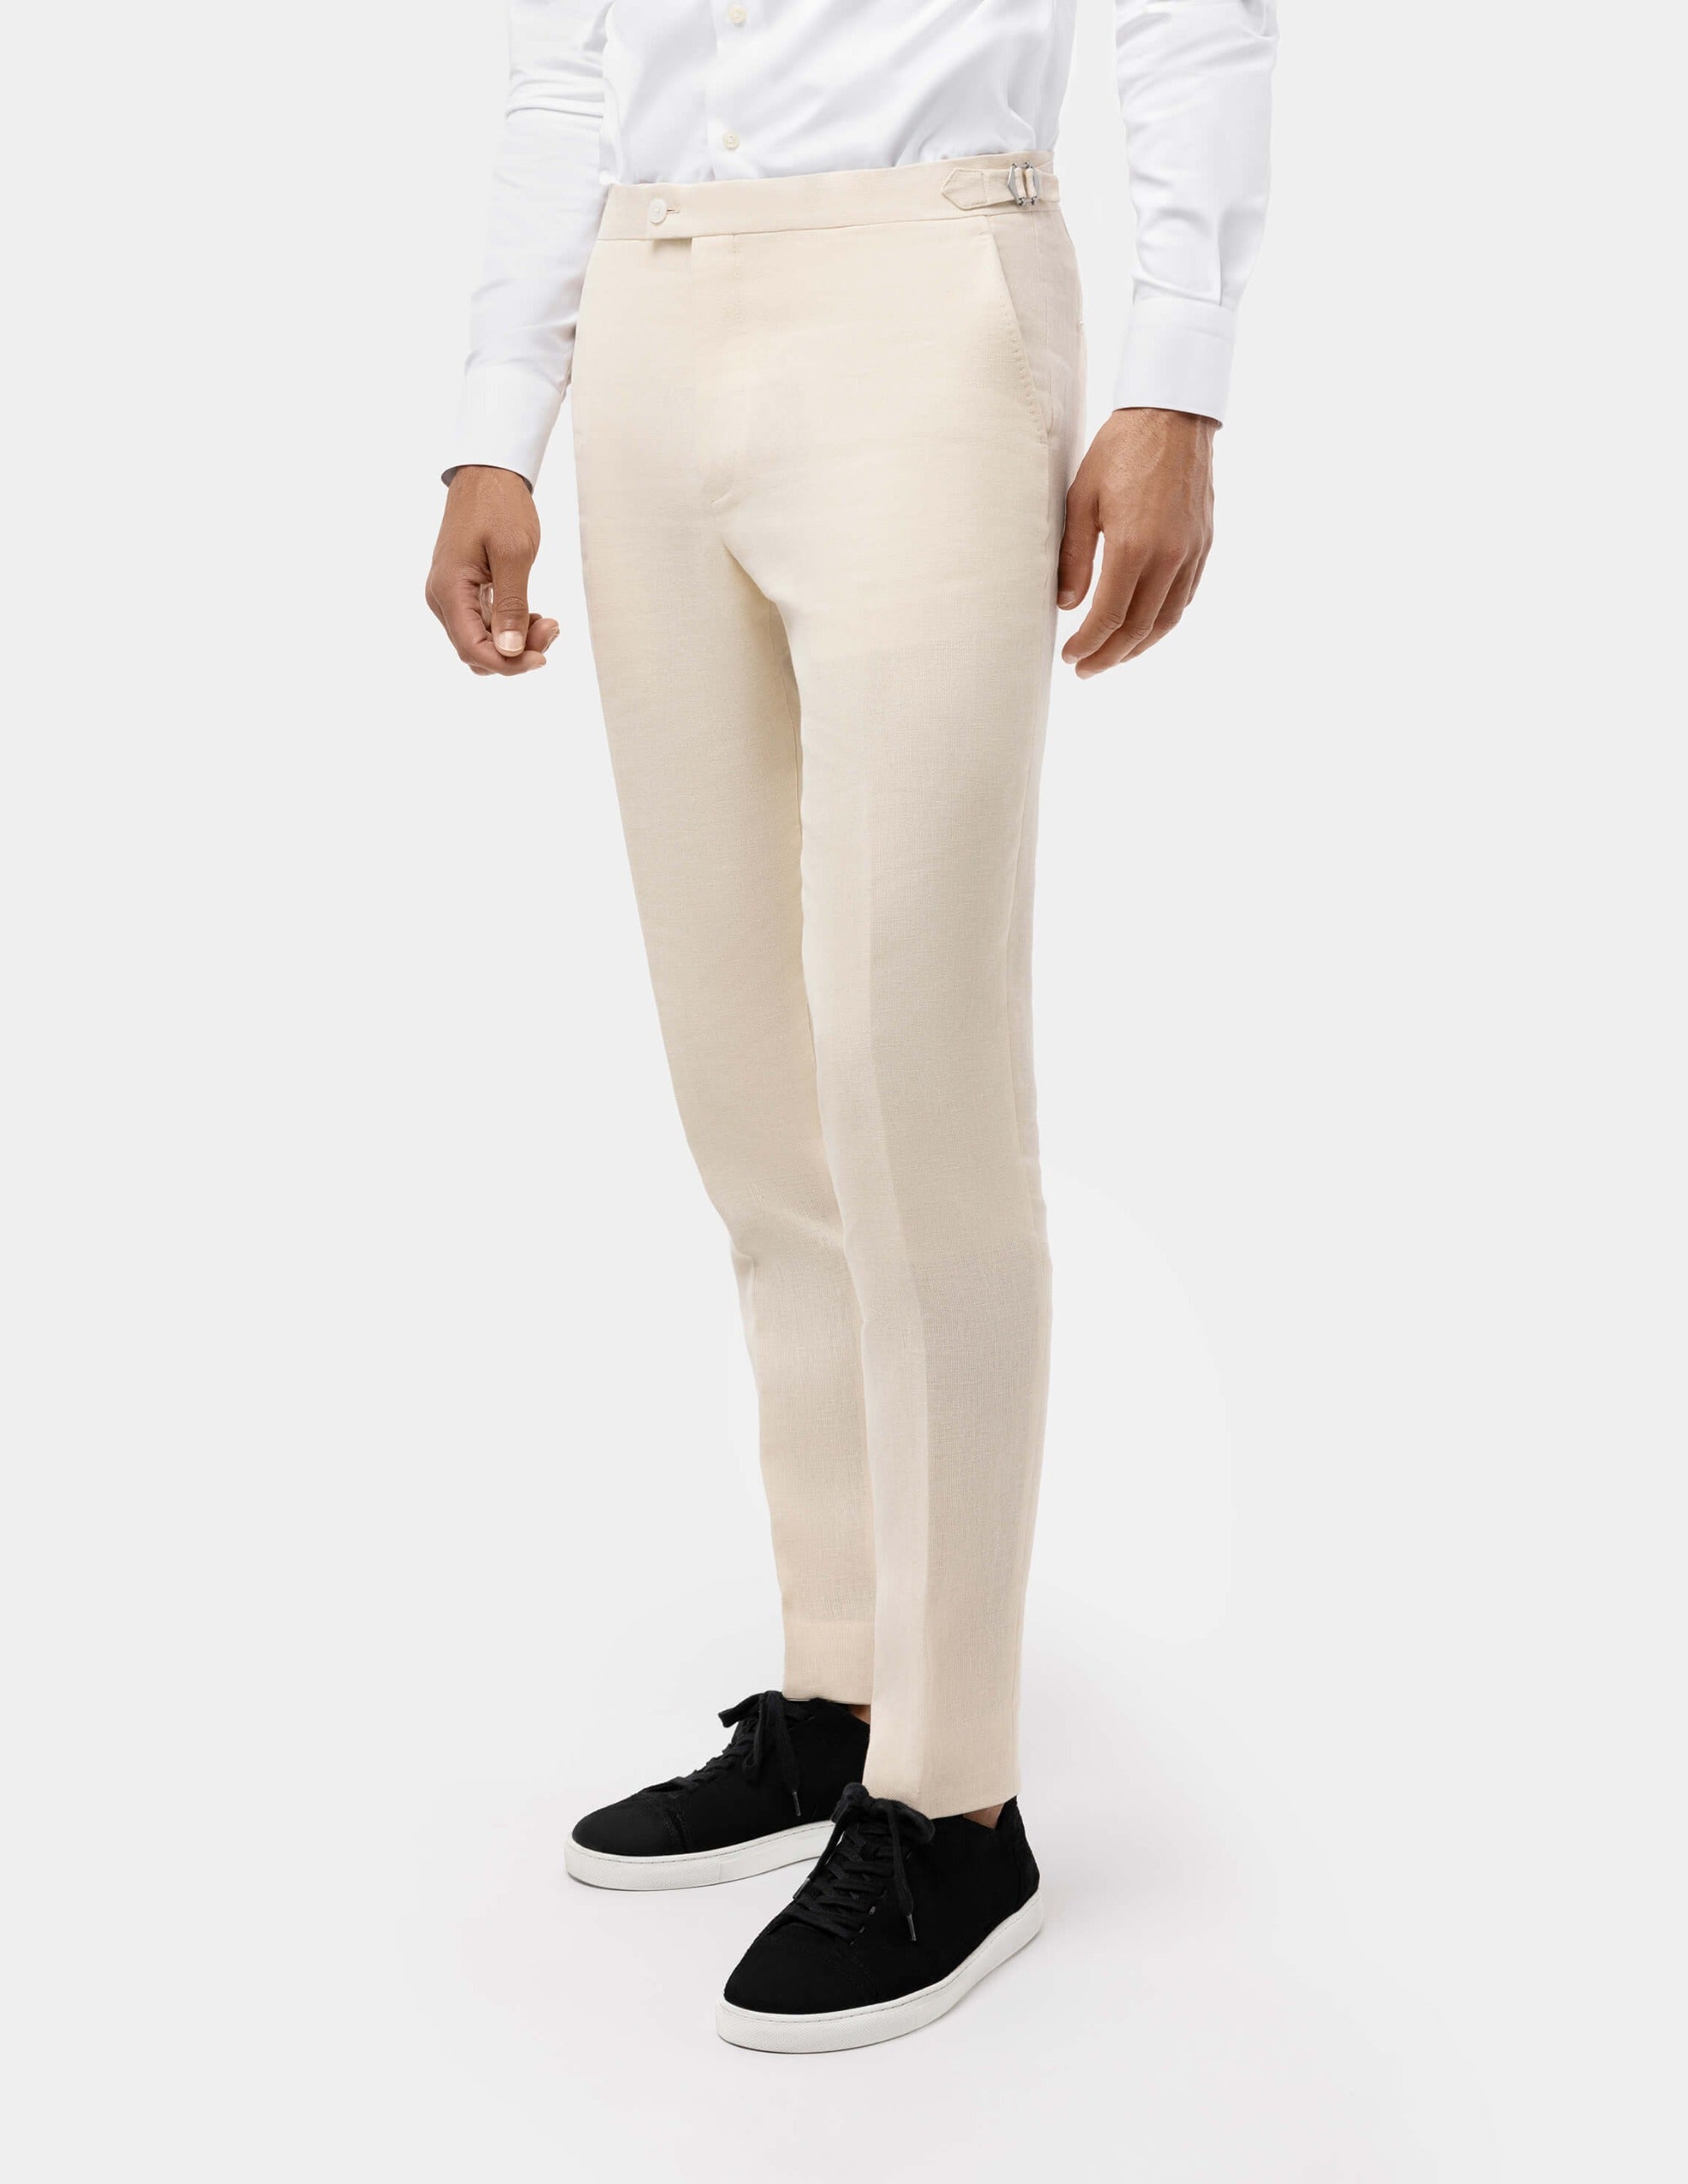 J.E. Mc Collum Linen trousers for men: for sale at 24.99€ on Mecshopping.it